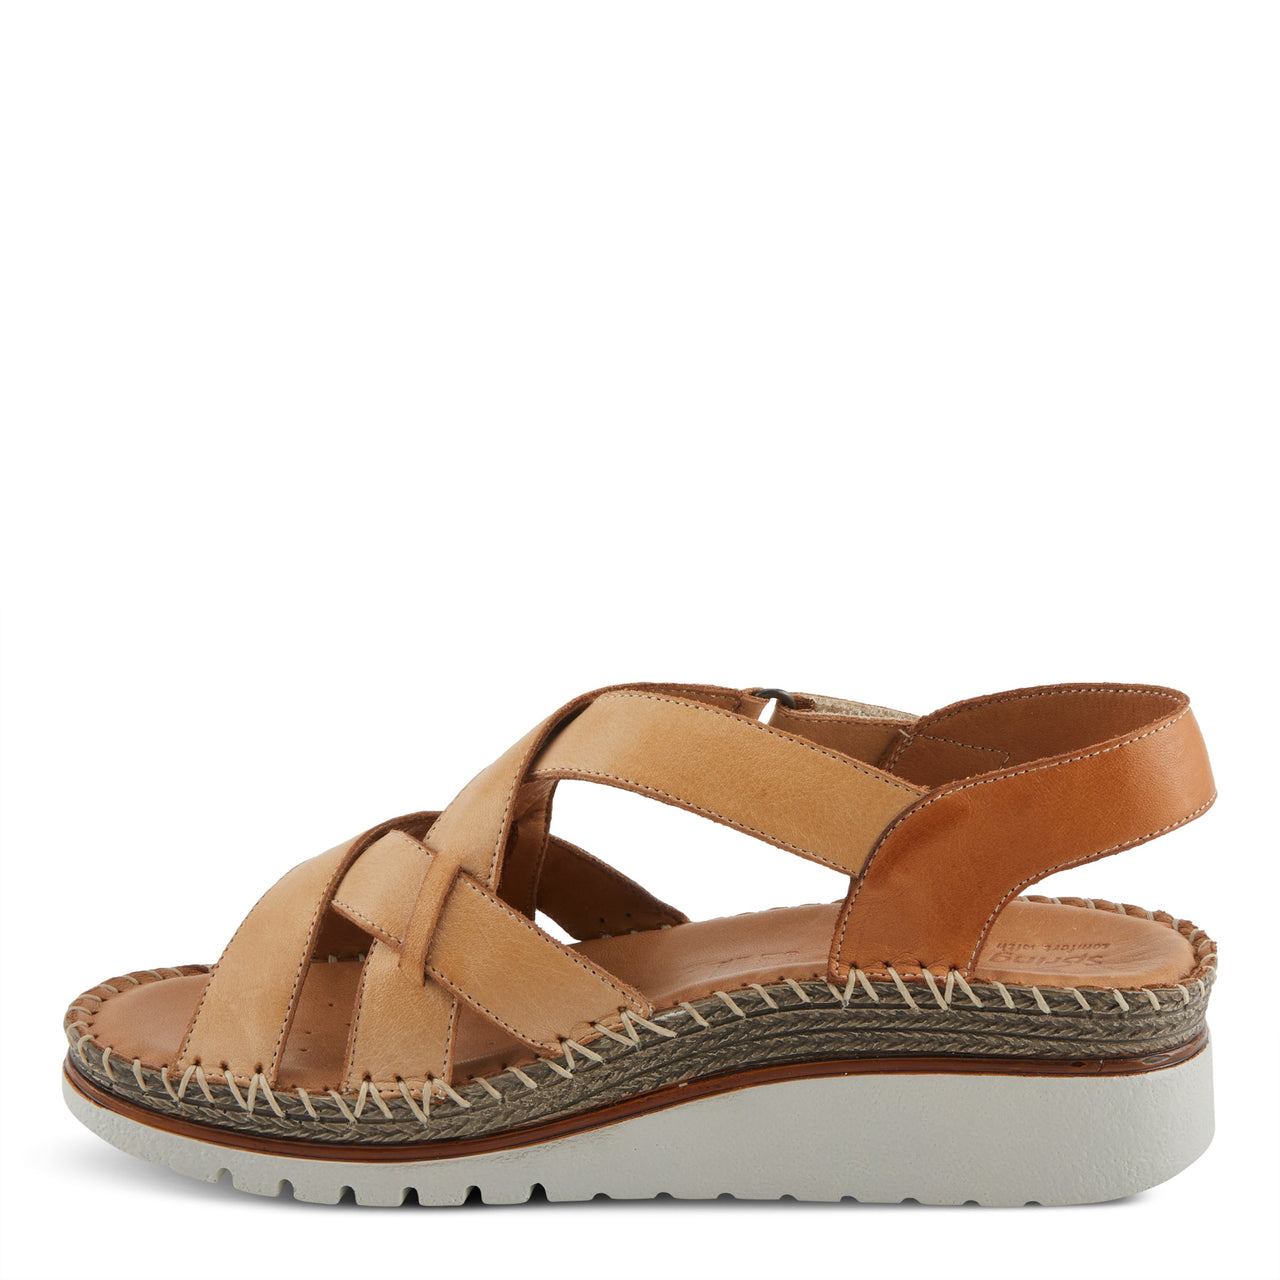 Spring Step Migula Sandals in bronze with cushioned arch support and soft suede footbed